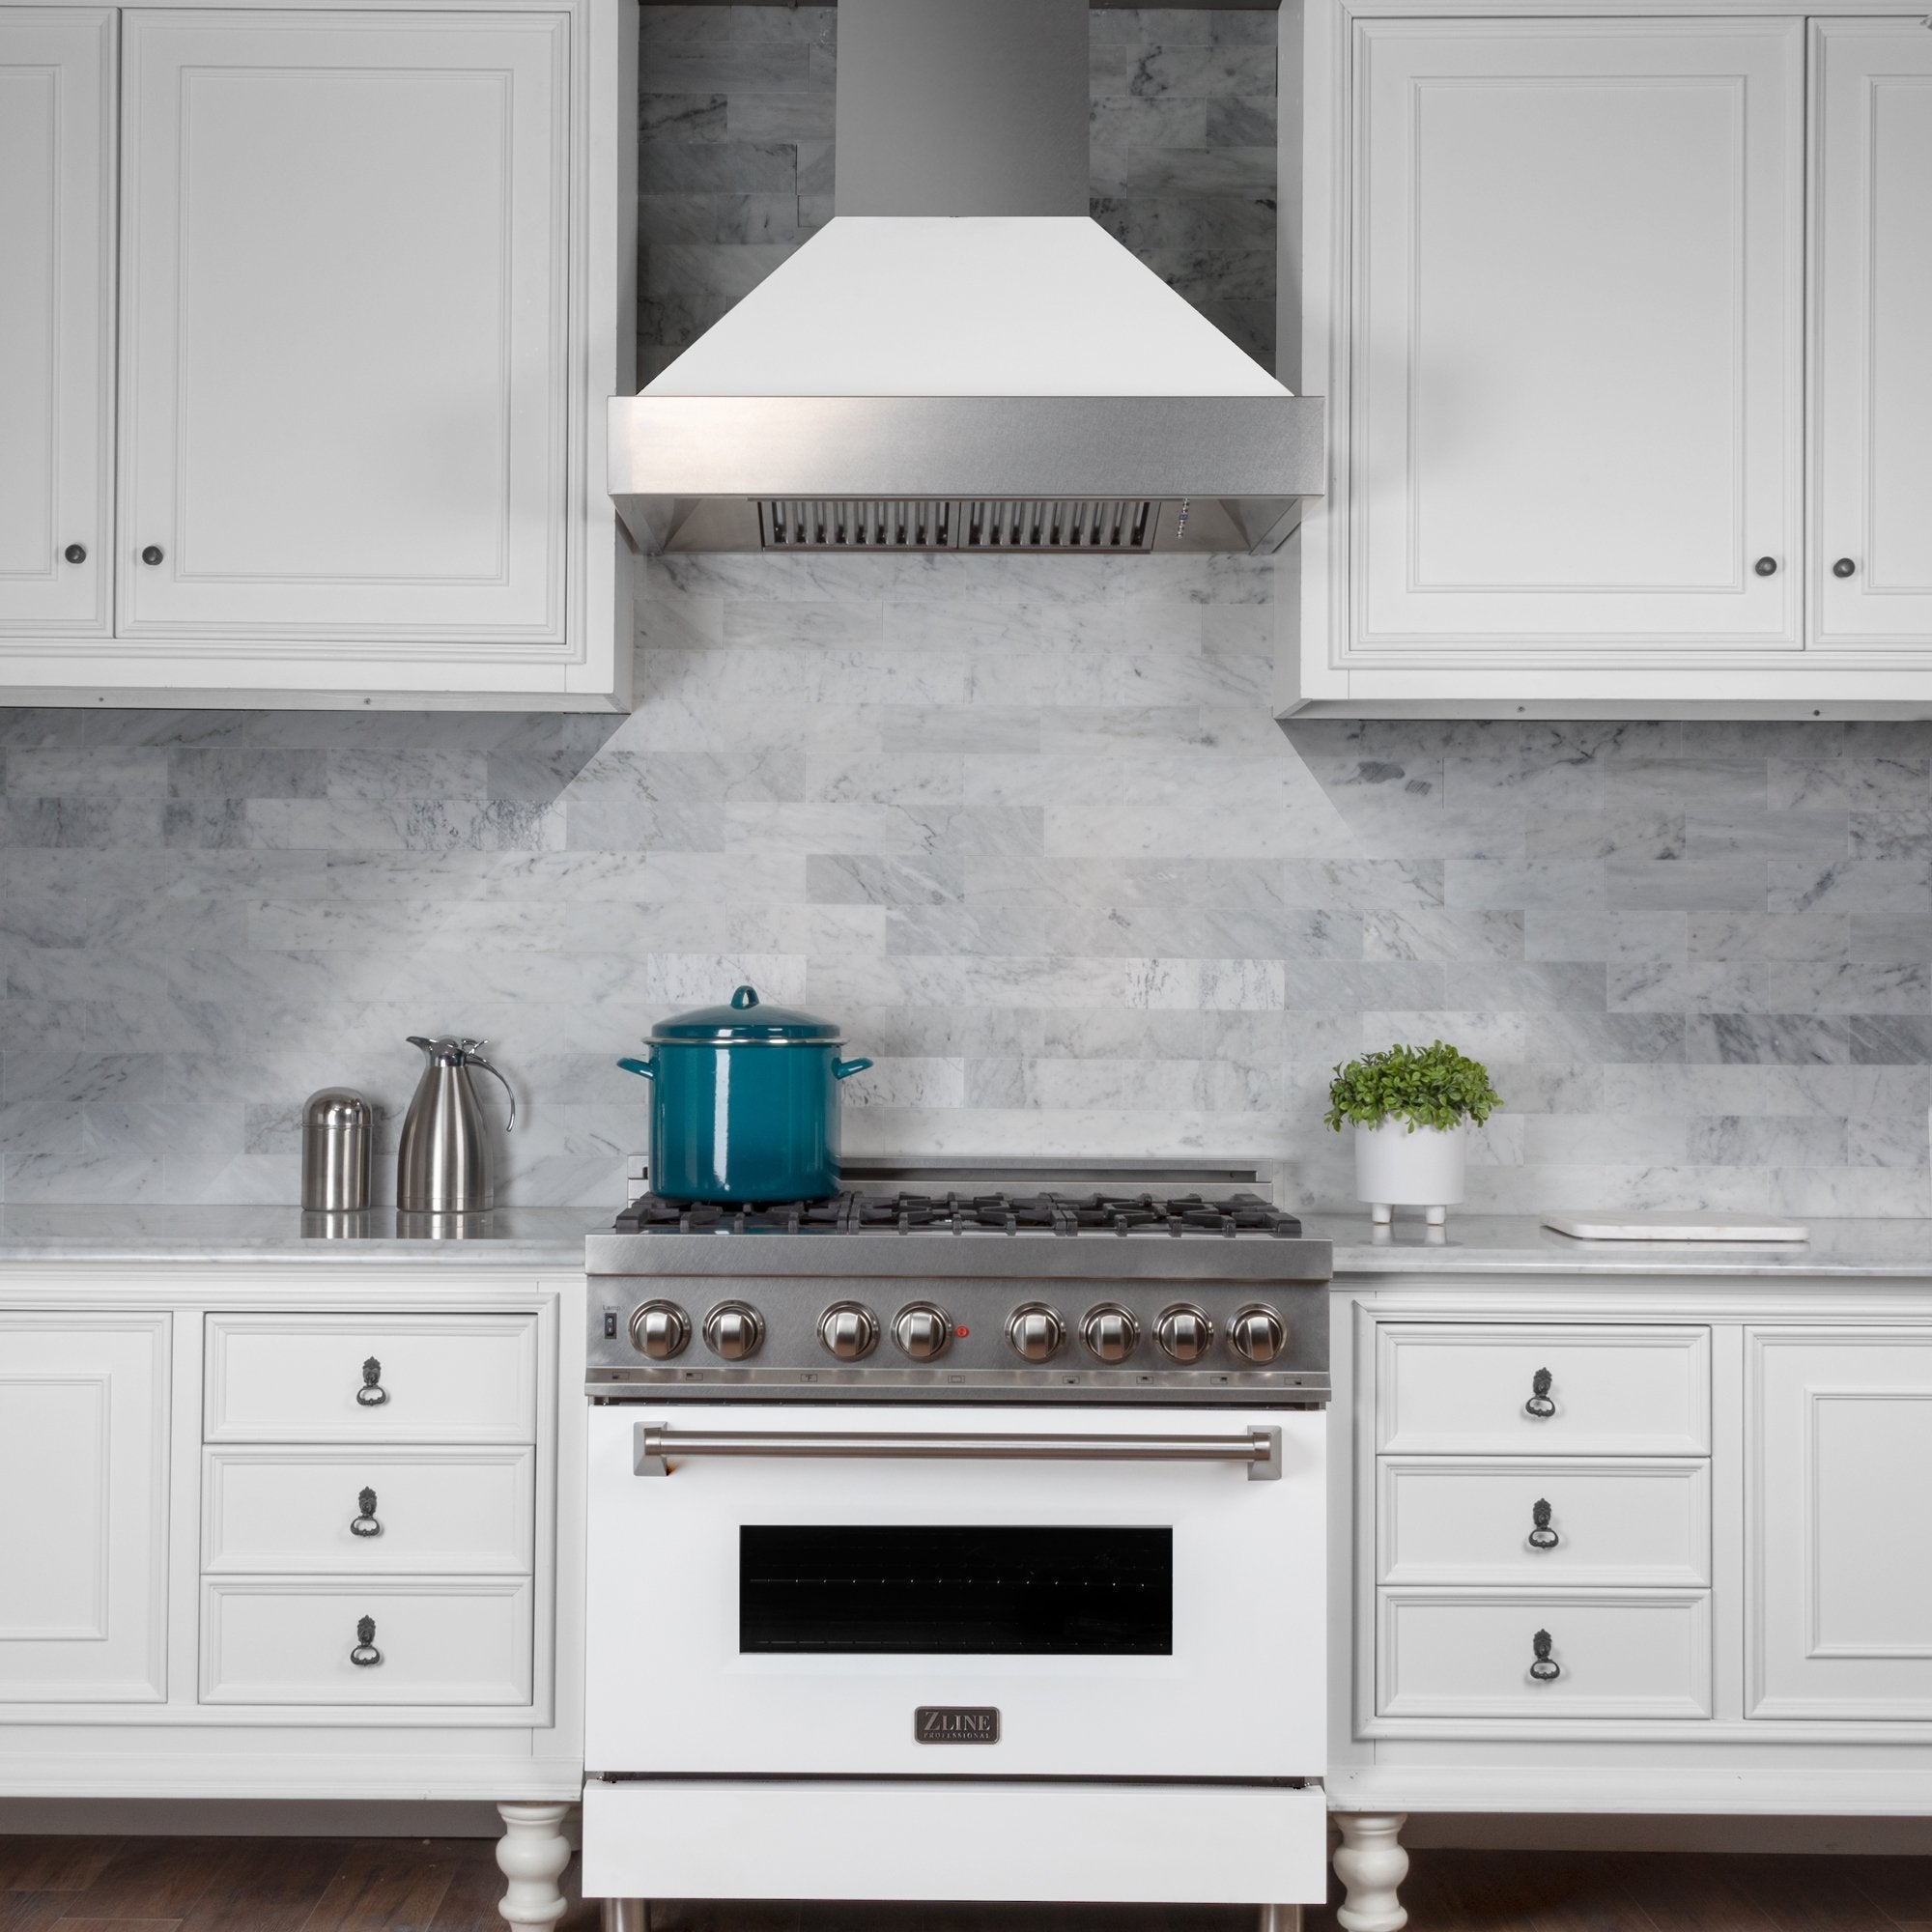 ZLINE Fingerprint Resistant Stainless Steel Range Hood With White Matte Shell (8654WM) with a short chimney above a matching kitchen range from front.